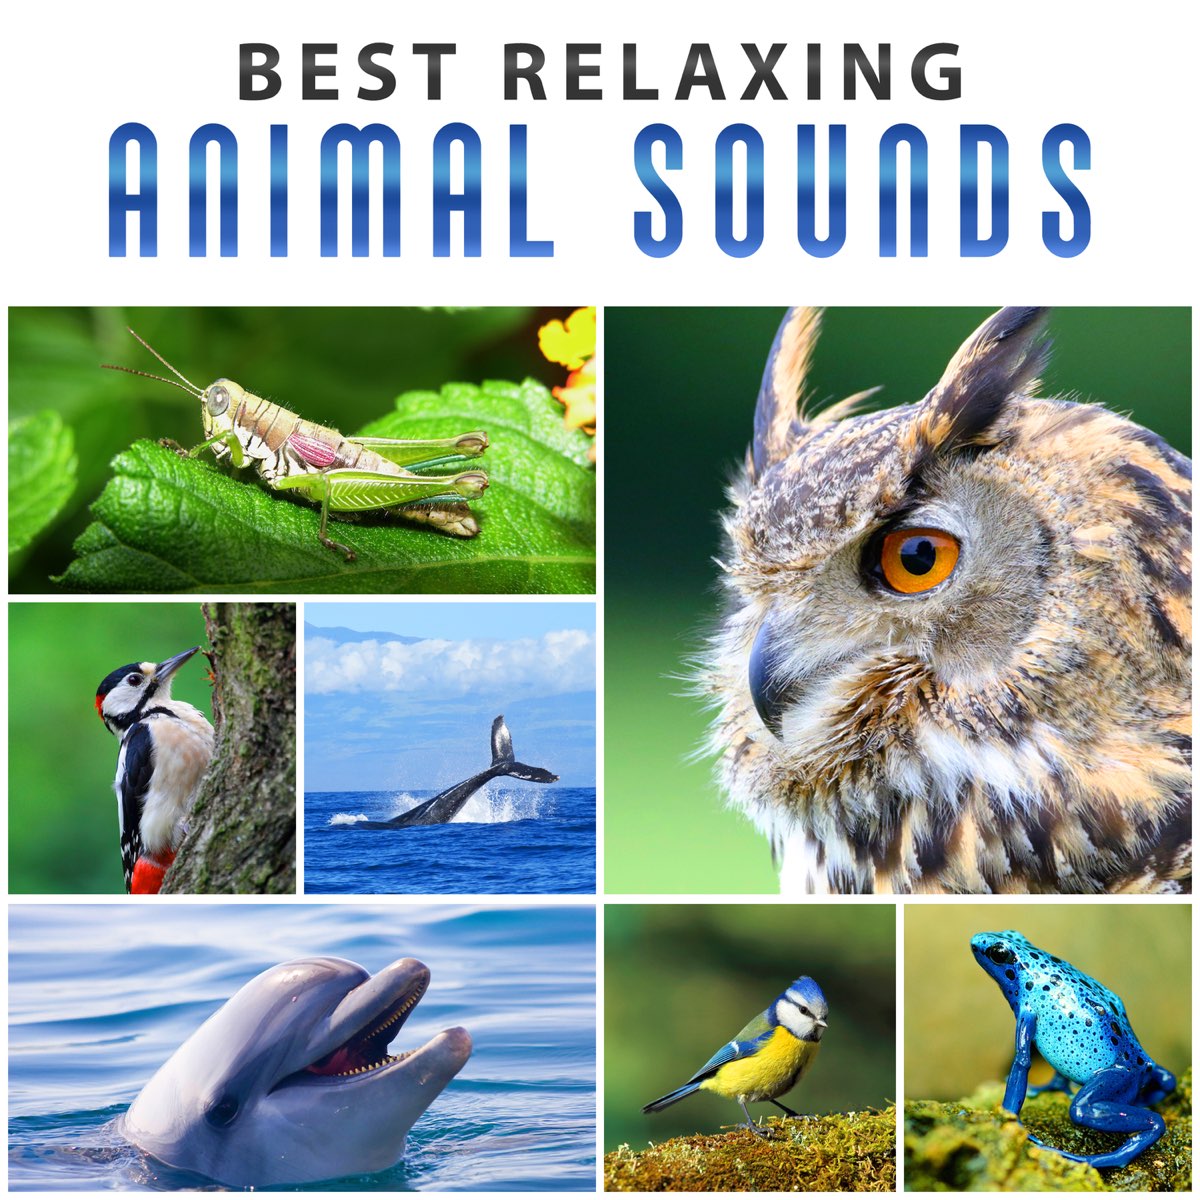 Best Relaxing Animal Sounds: Whale Sounds, Singing Birds, Croaking Frogs,  Screeching Dolphins, Tapping Woodpecker, Hooting Owls, Crickets Chirping by  Natural Sounds Music Academy on Apple Music